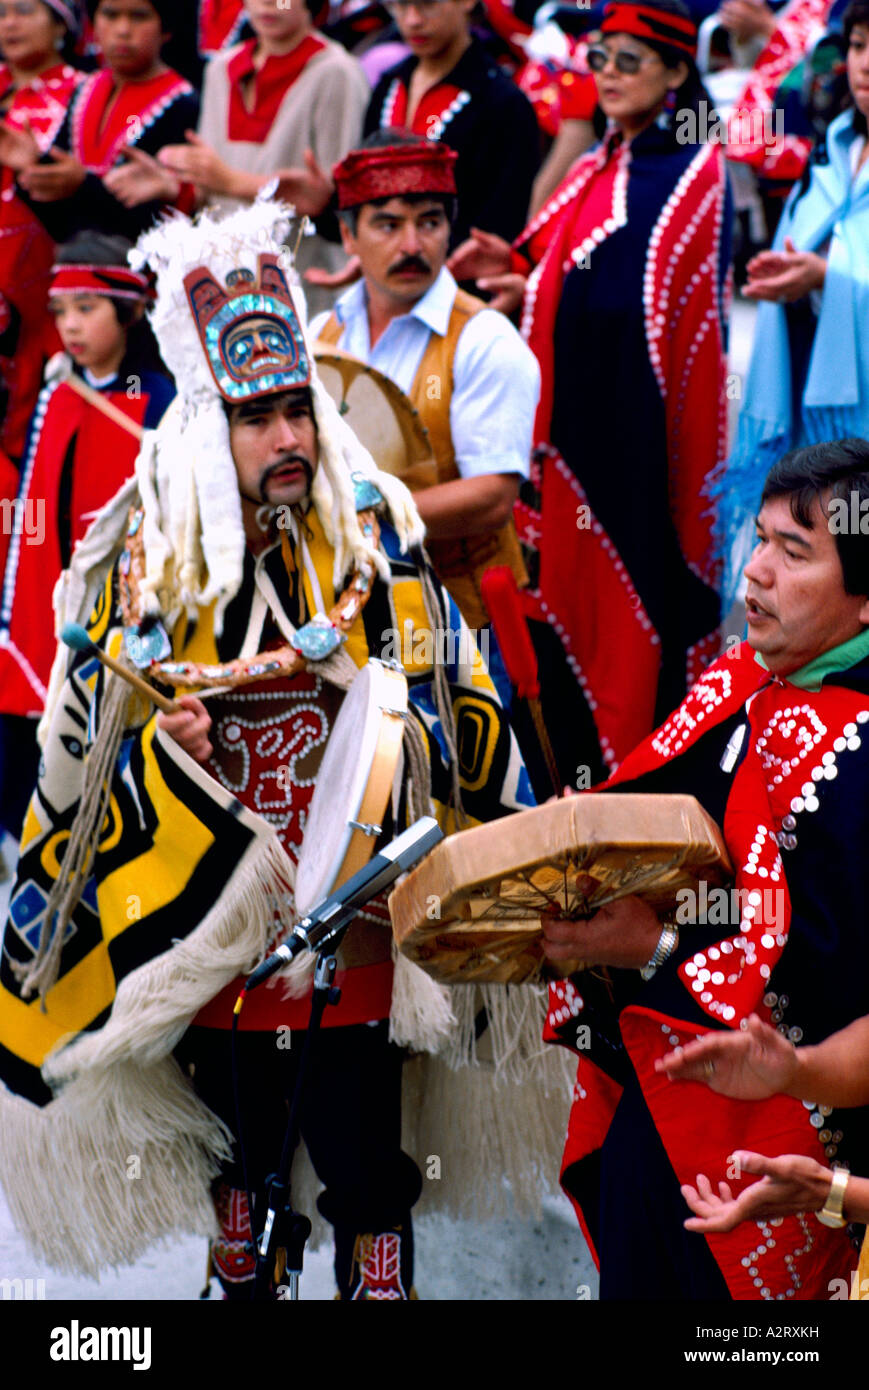 Native American Indians in Traditional Ceremonial Regalia celebrating at a Pow Wow in Bella Bella British Columbia Canada Stock Photo